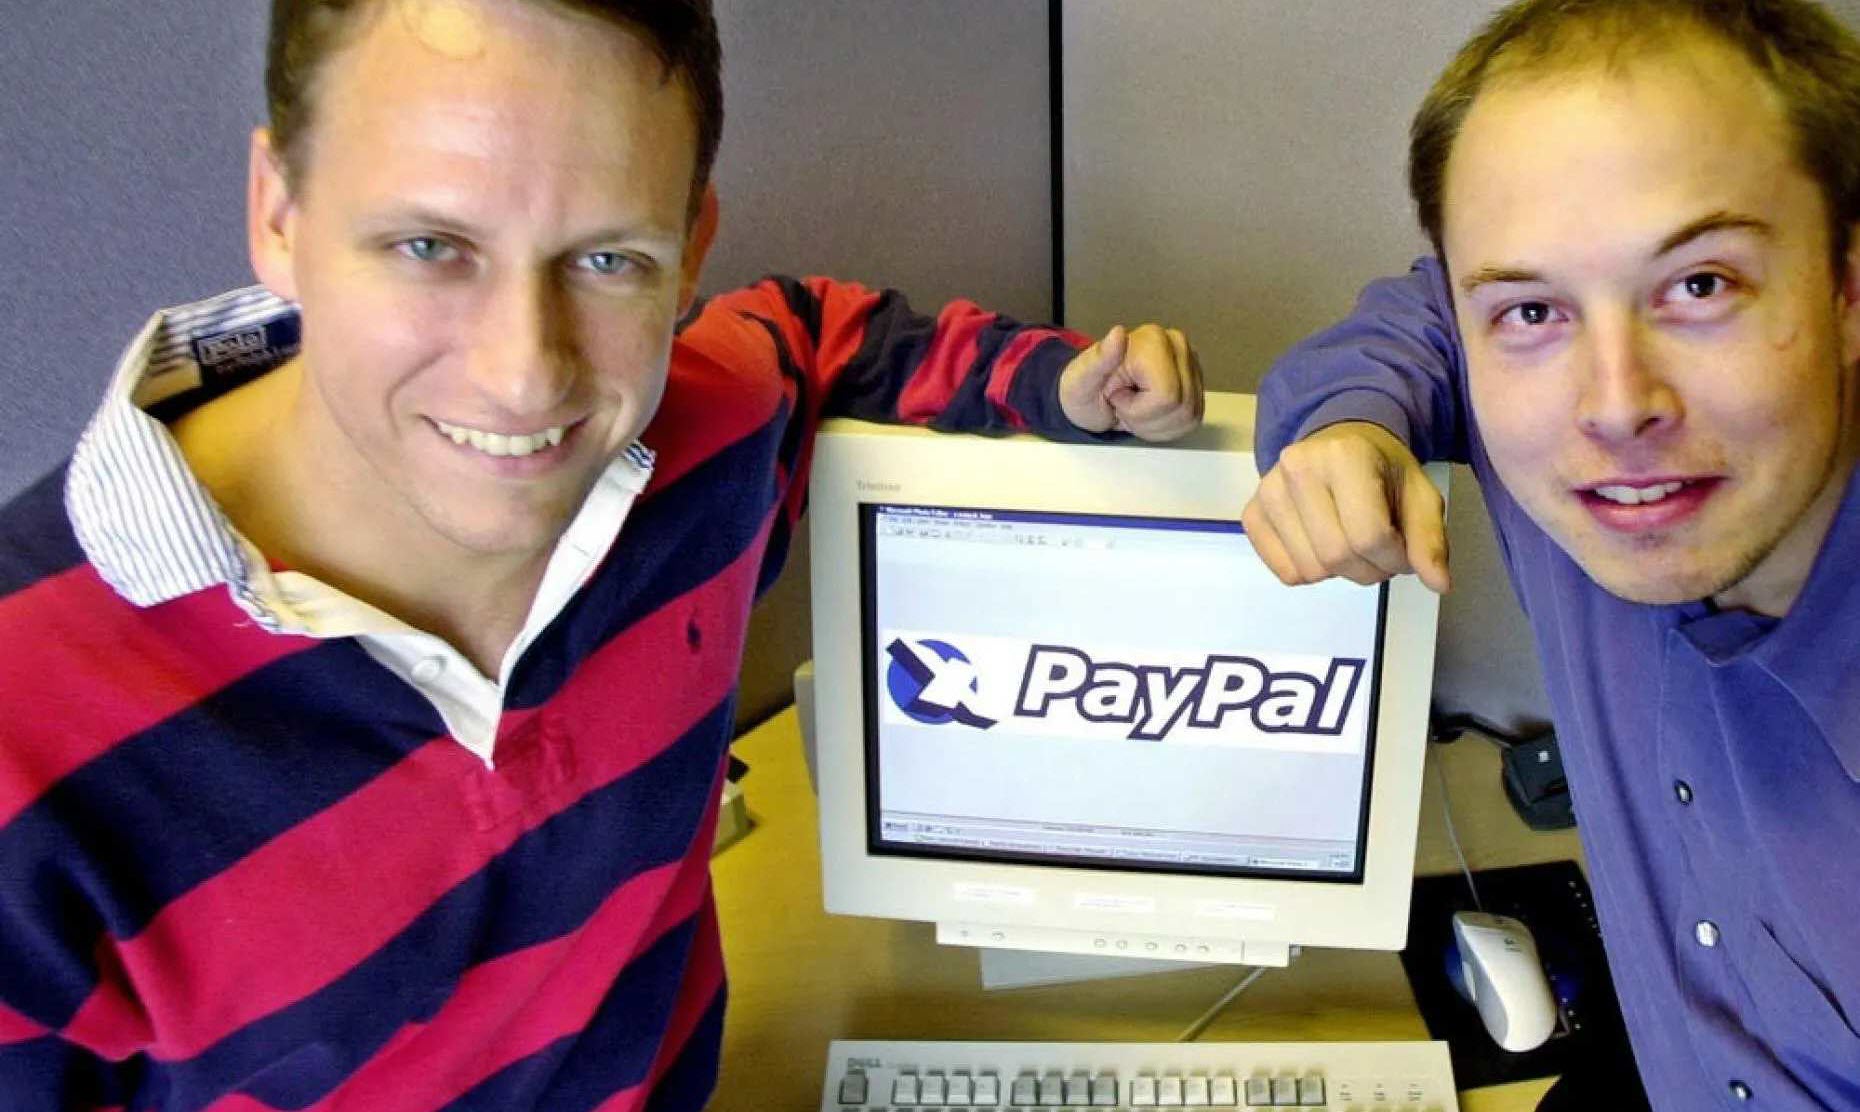 Elon Musk and Peter Thiel Paypal